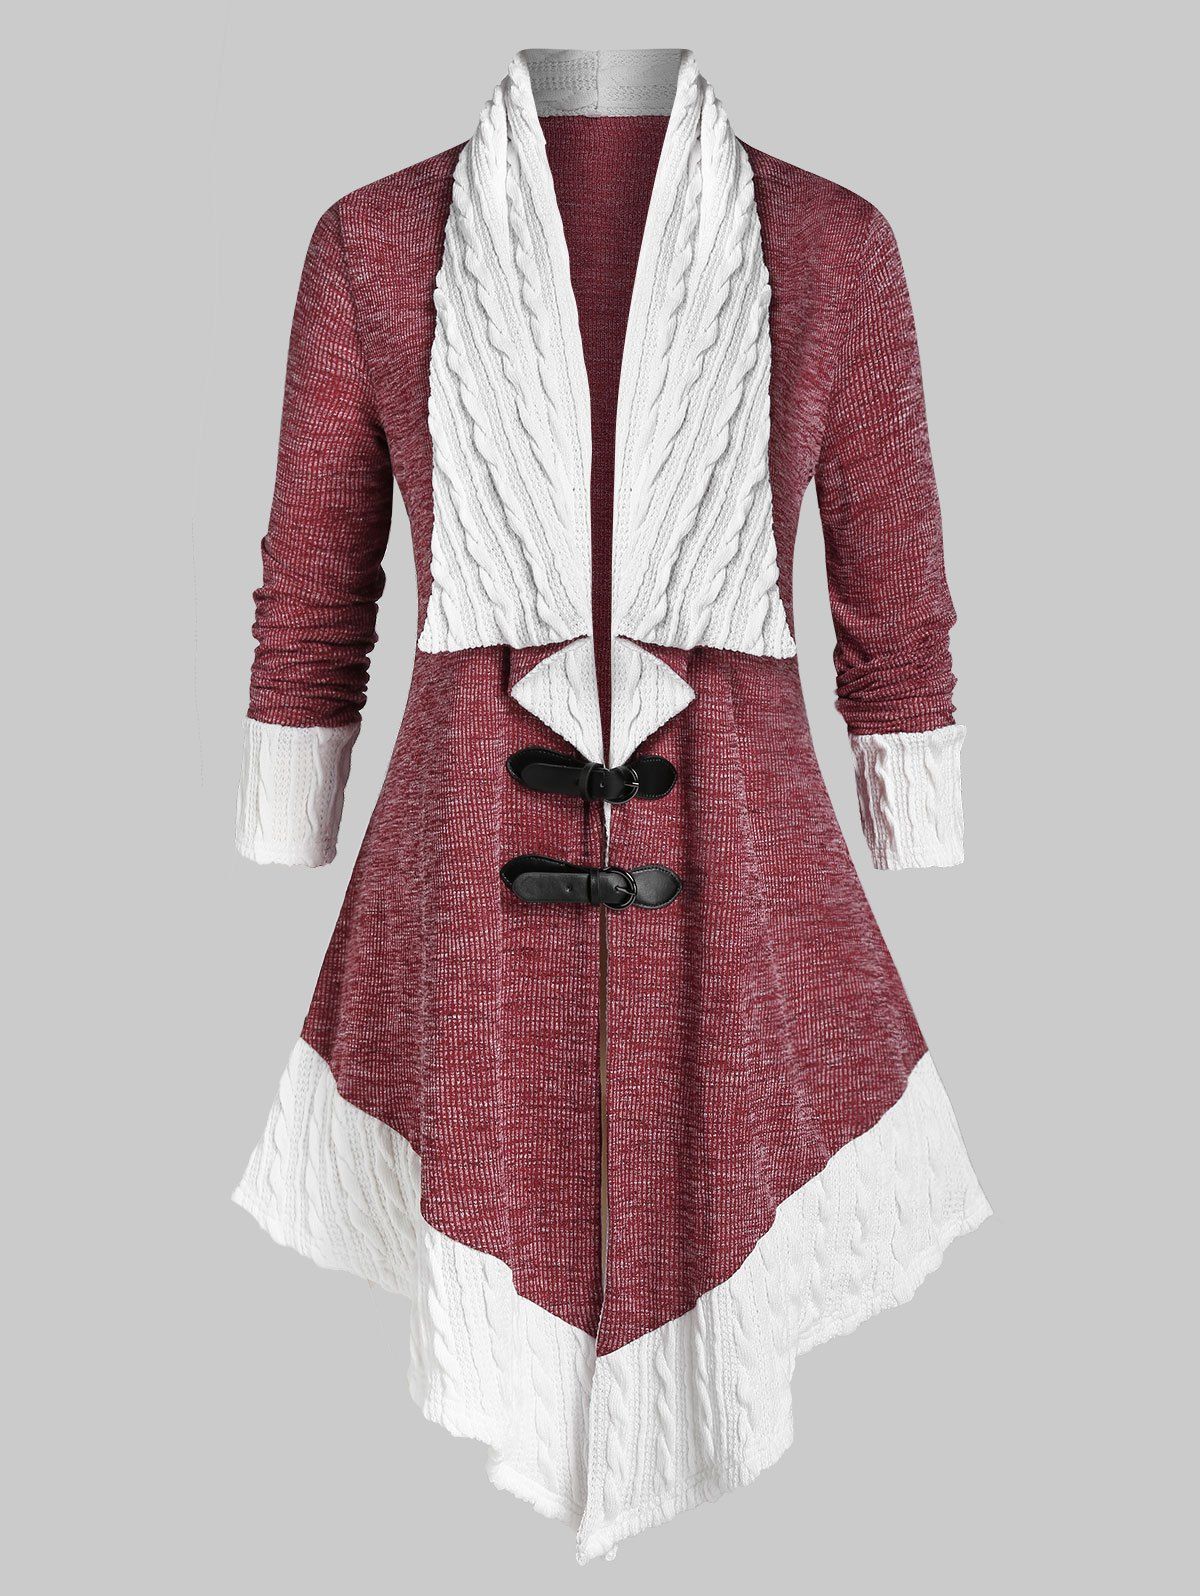 Plus Size Buckles Two Tone Cable Knit Cardigan - RED WINE 3X